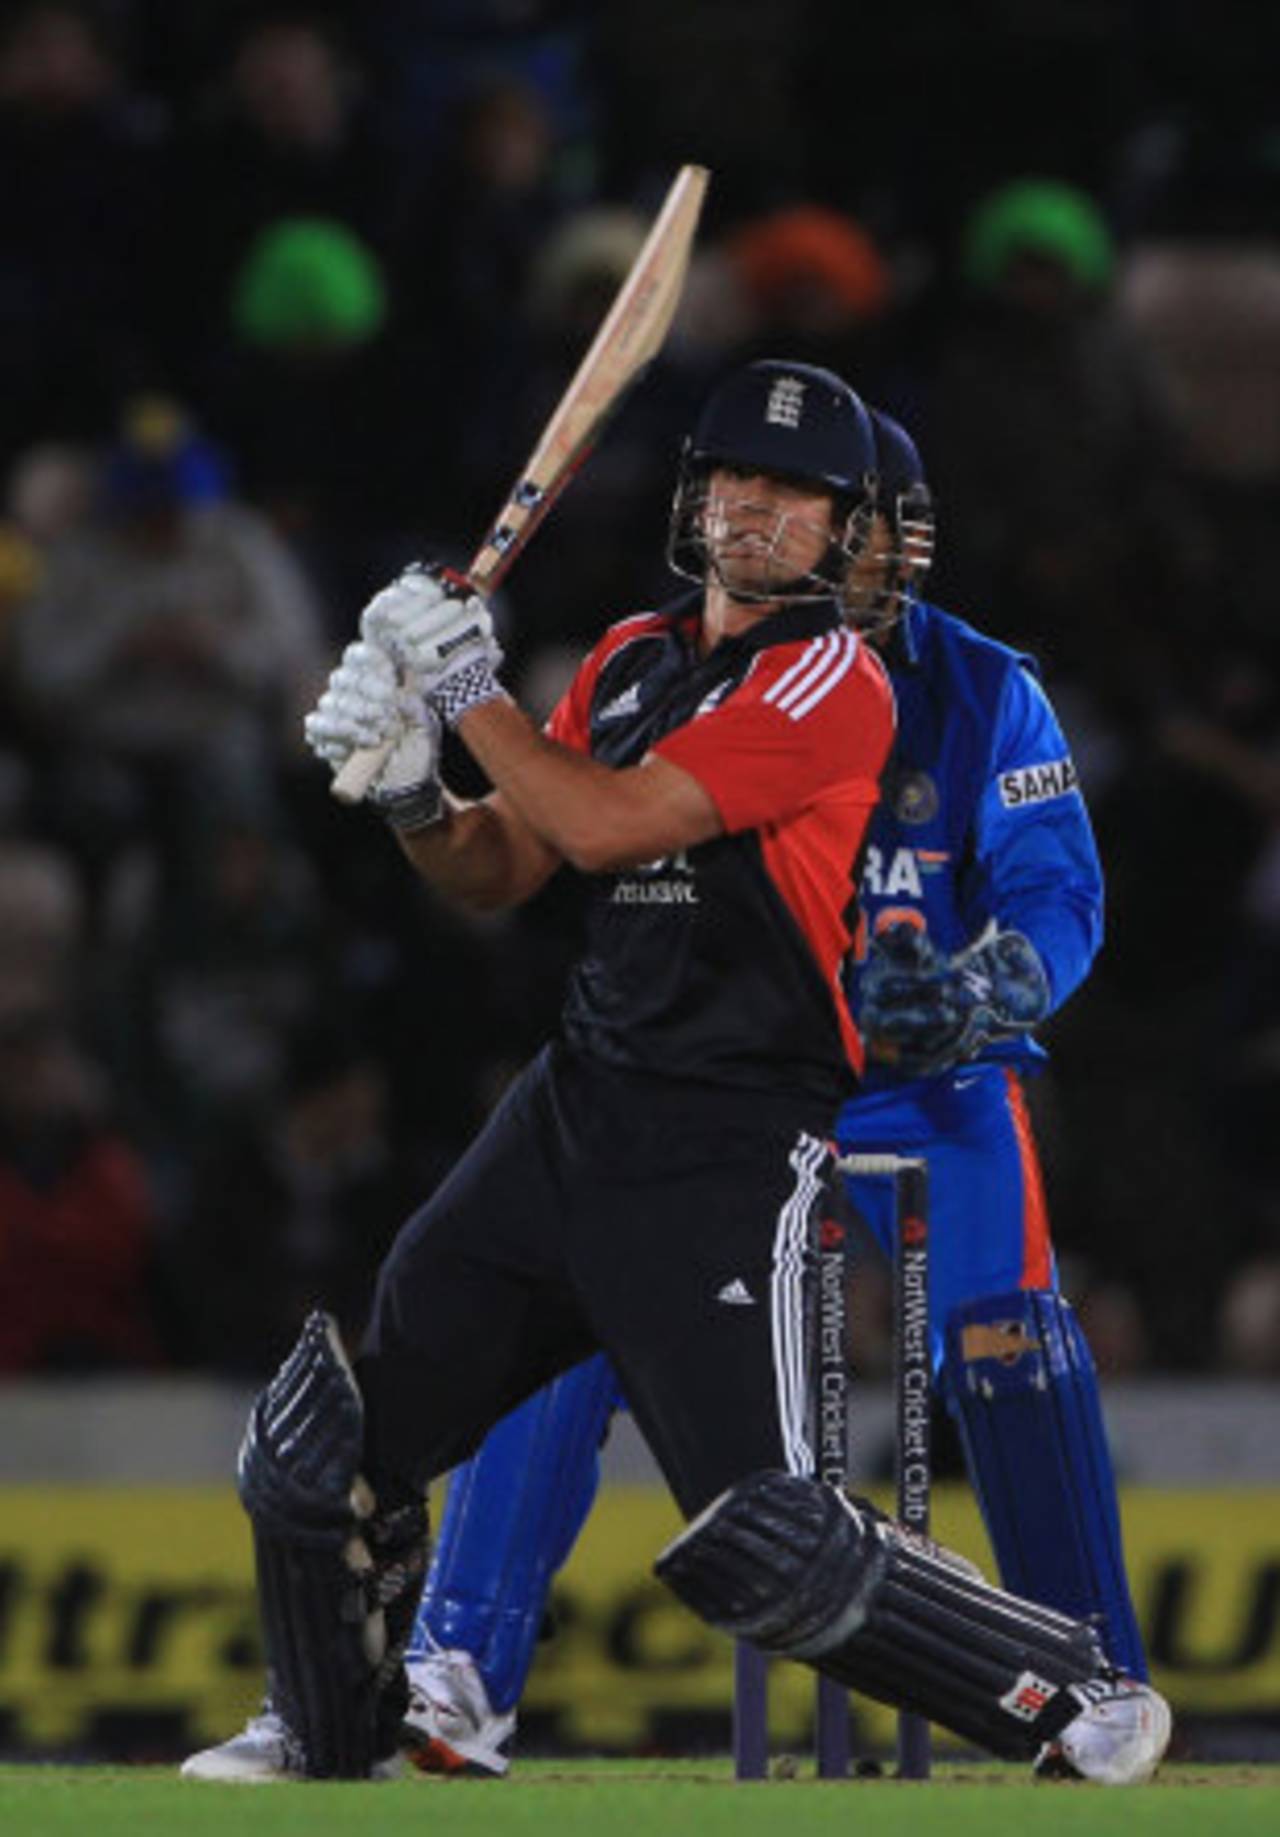 Alastair Cook led England to victory with an unbeaten 80, England v India, 2nd ODI, Rose Bowl, September 6 2011